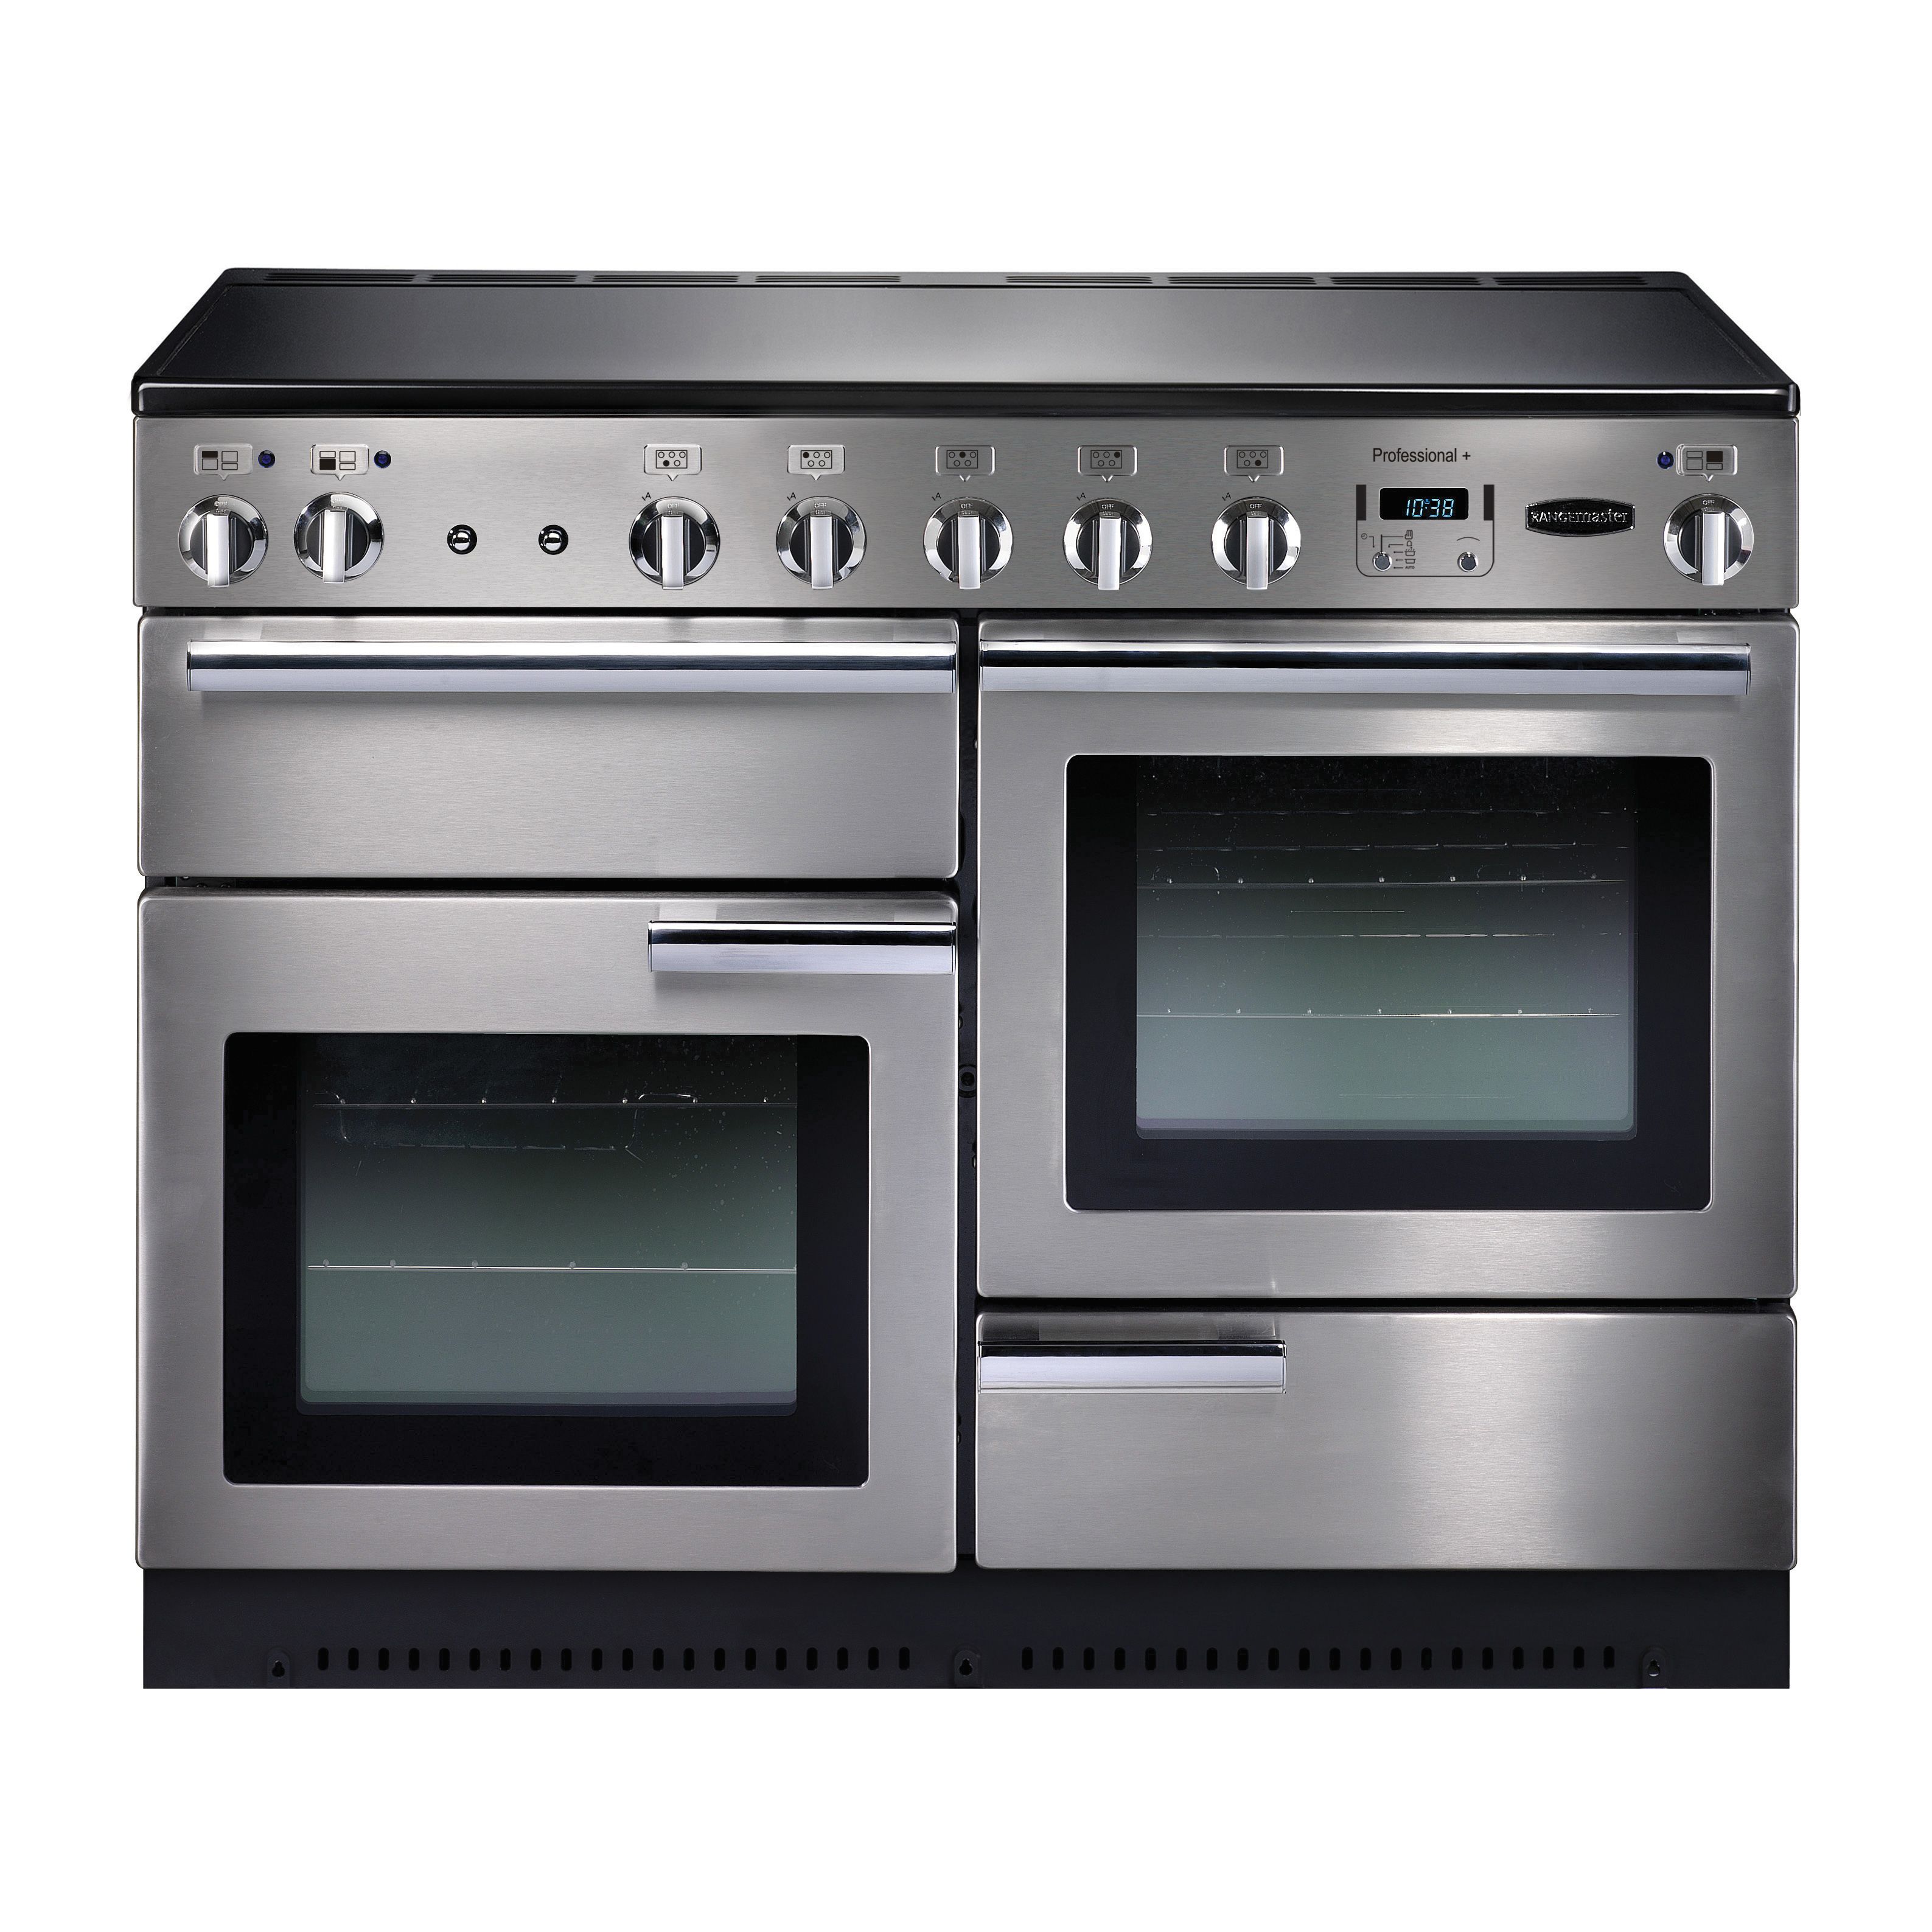 Rangemaster PROP110EISSC Freestanding Electric Range cooker with Induction Hob - Stainless steel effect